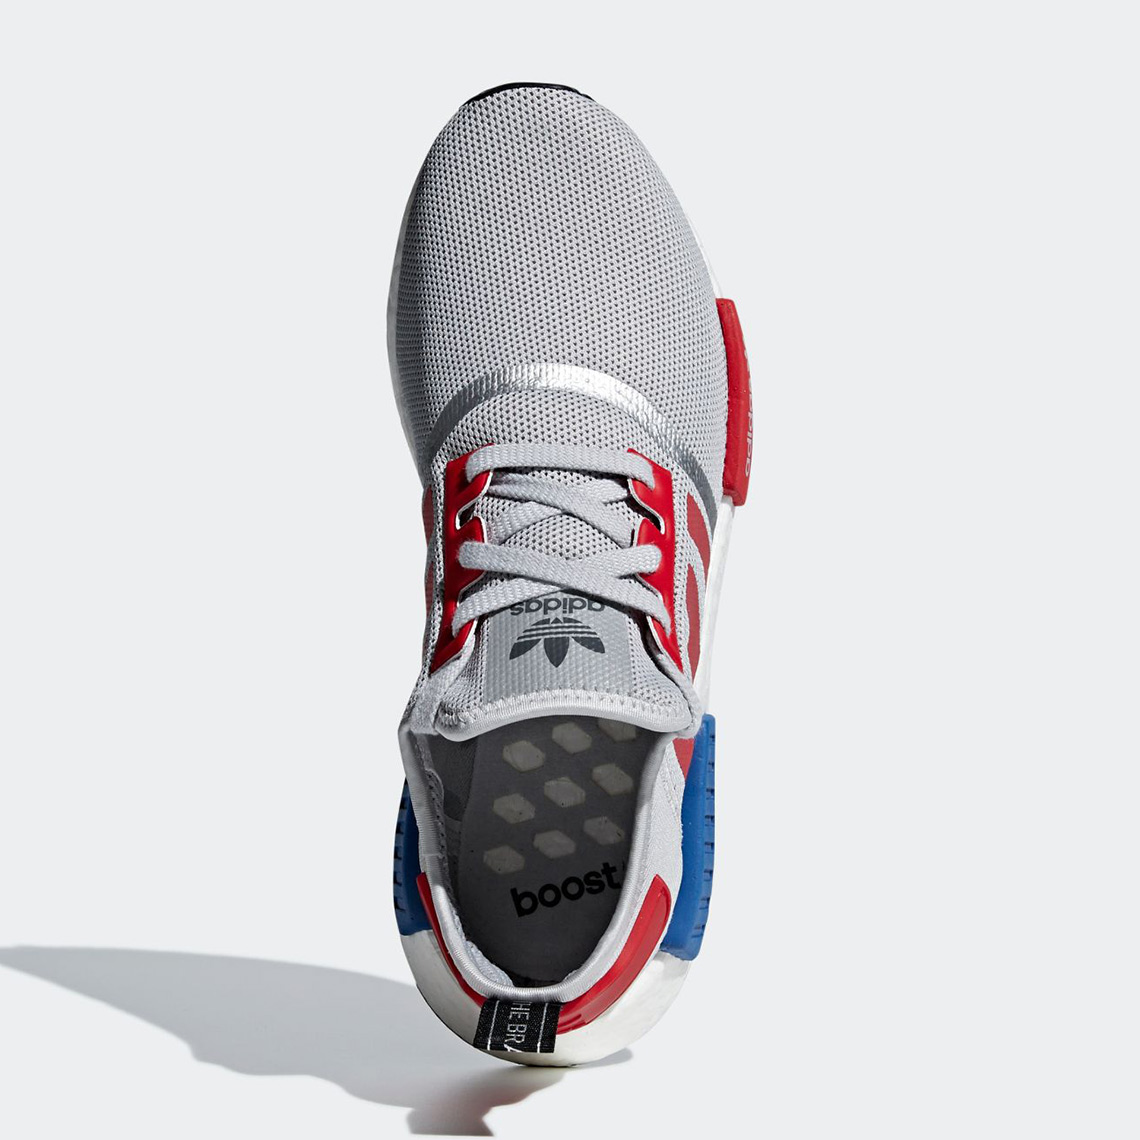 Adidas Nmd R1 Micropacer F99714 3